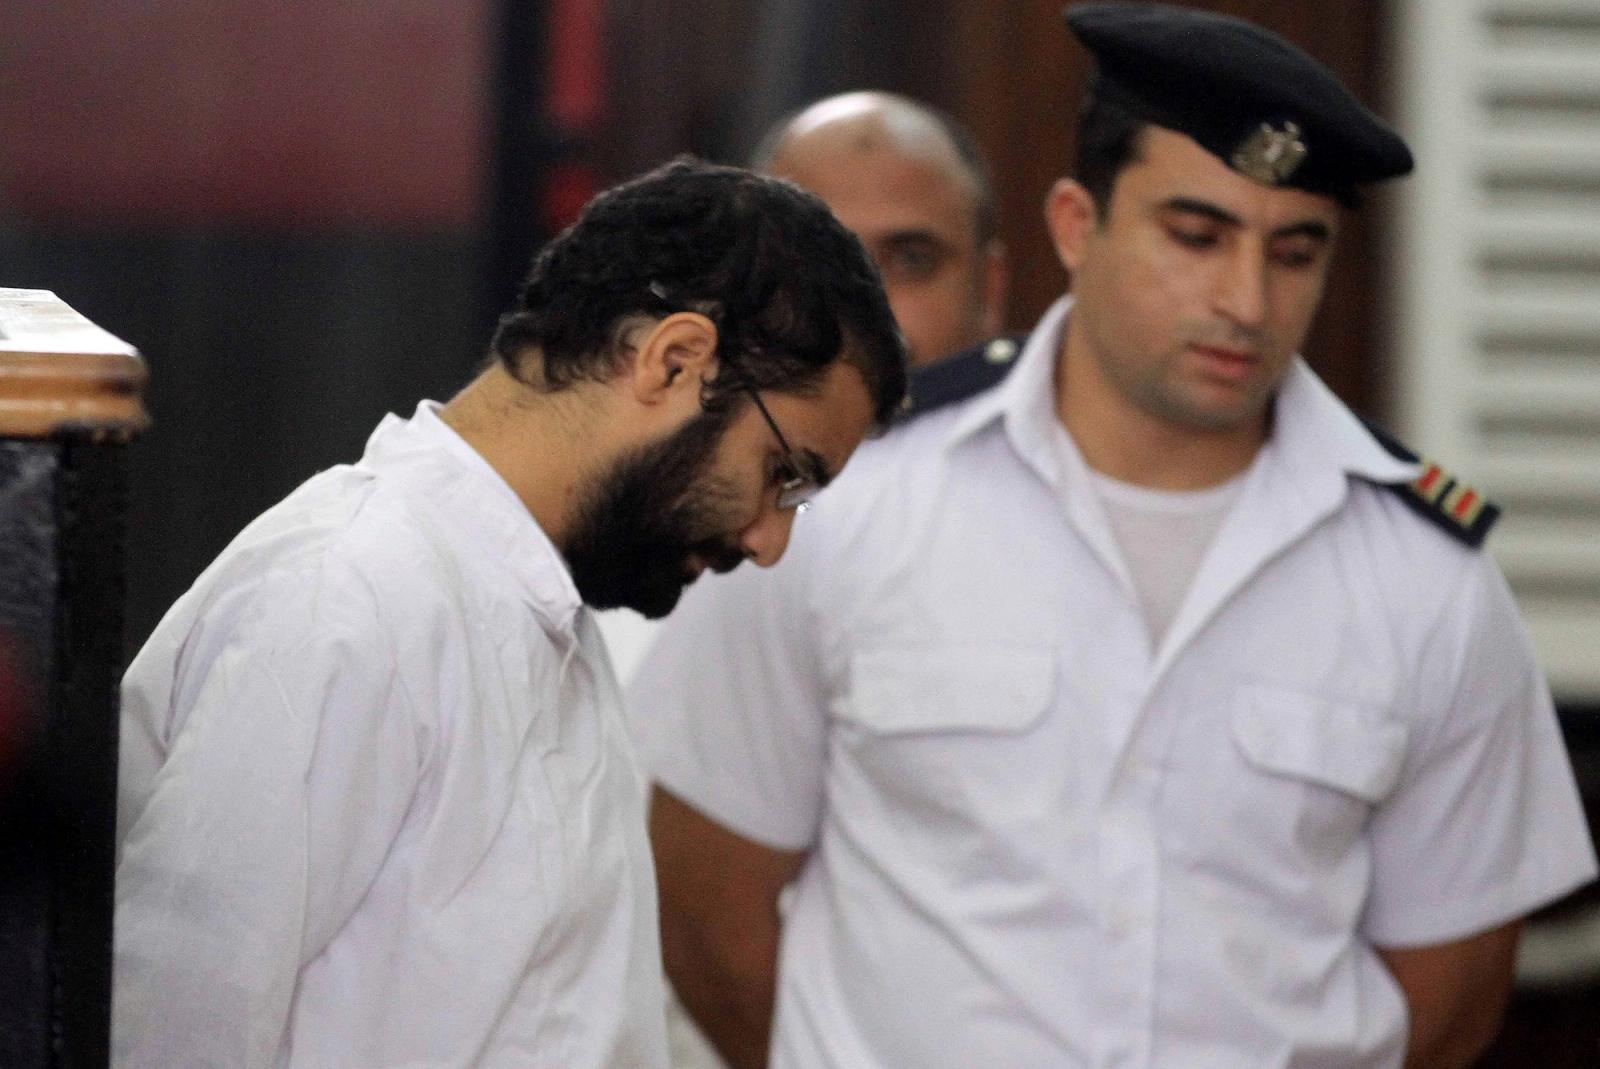 Activist Alaa Abd el-Fattah stands in front of a police officer at a court during his trial in Cairo.